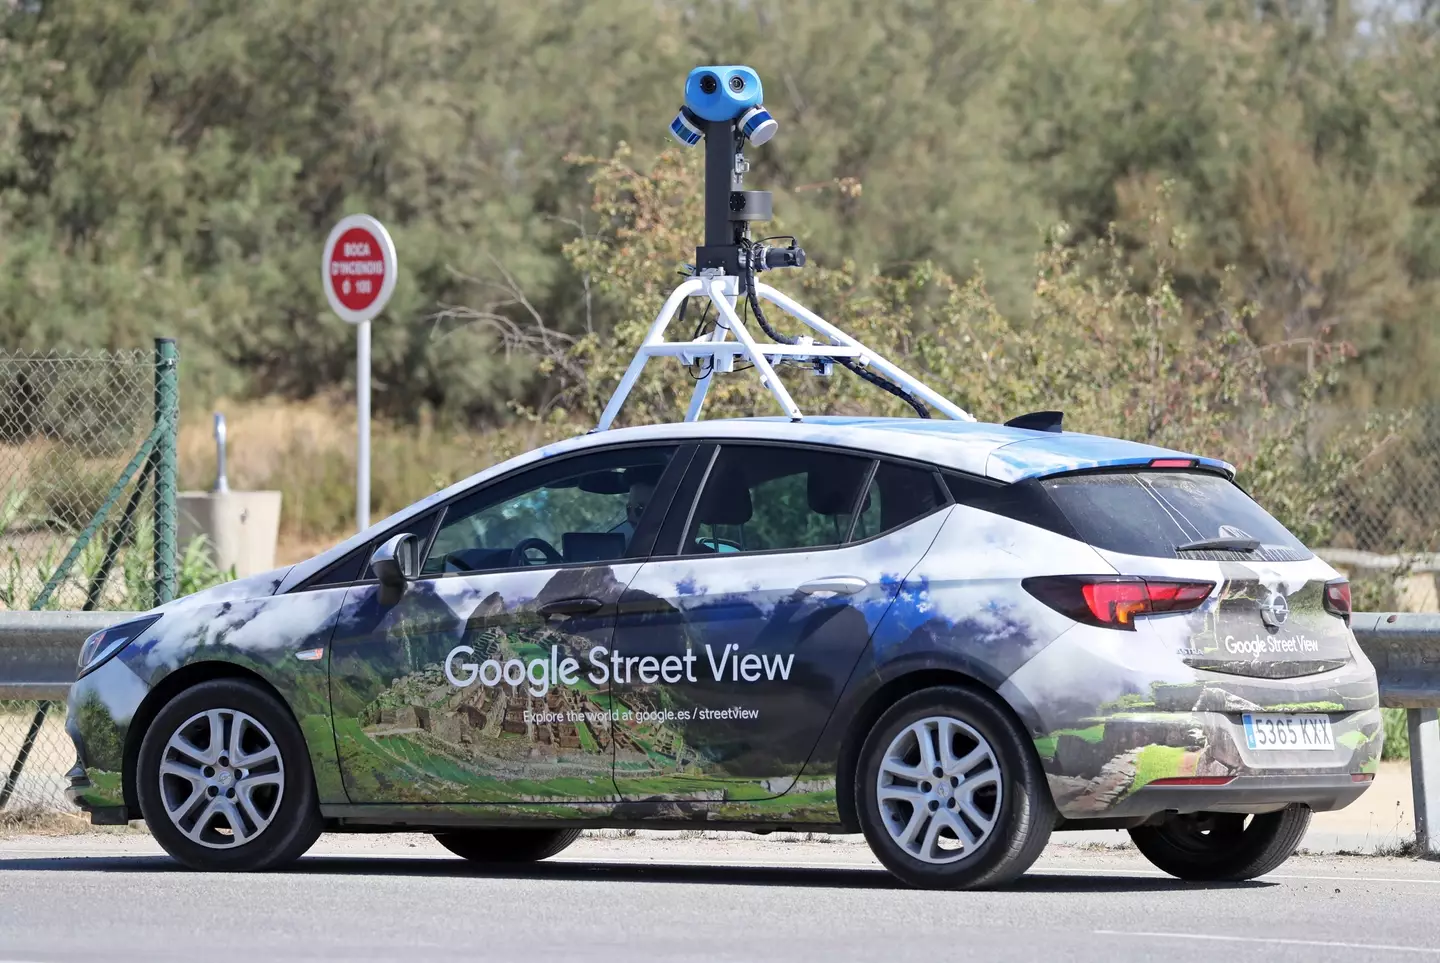 You'll probably recognise the Google Street View car whizzing about. NurPhoto / Contributor / Getty Images